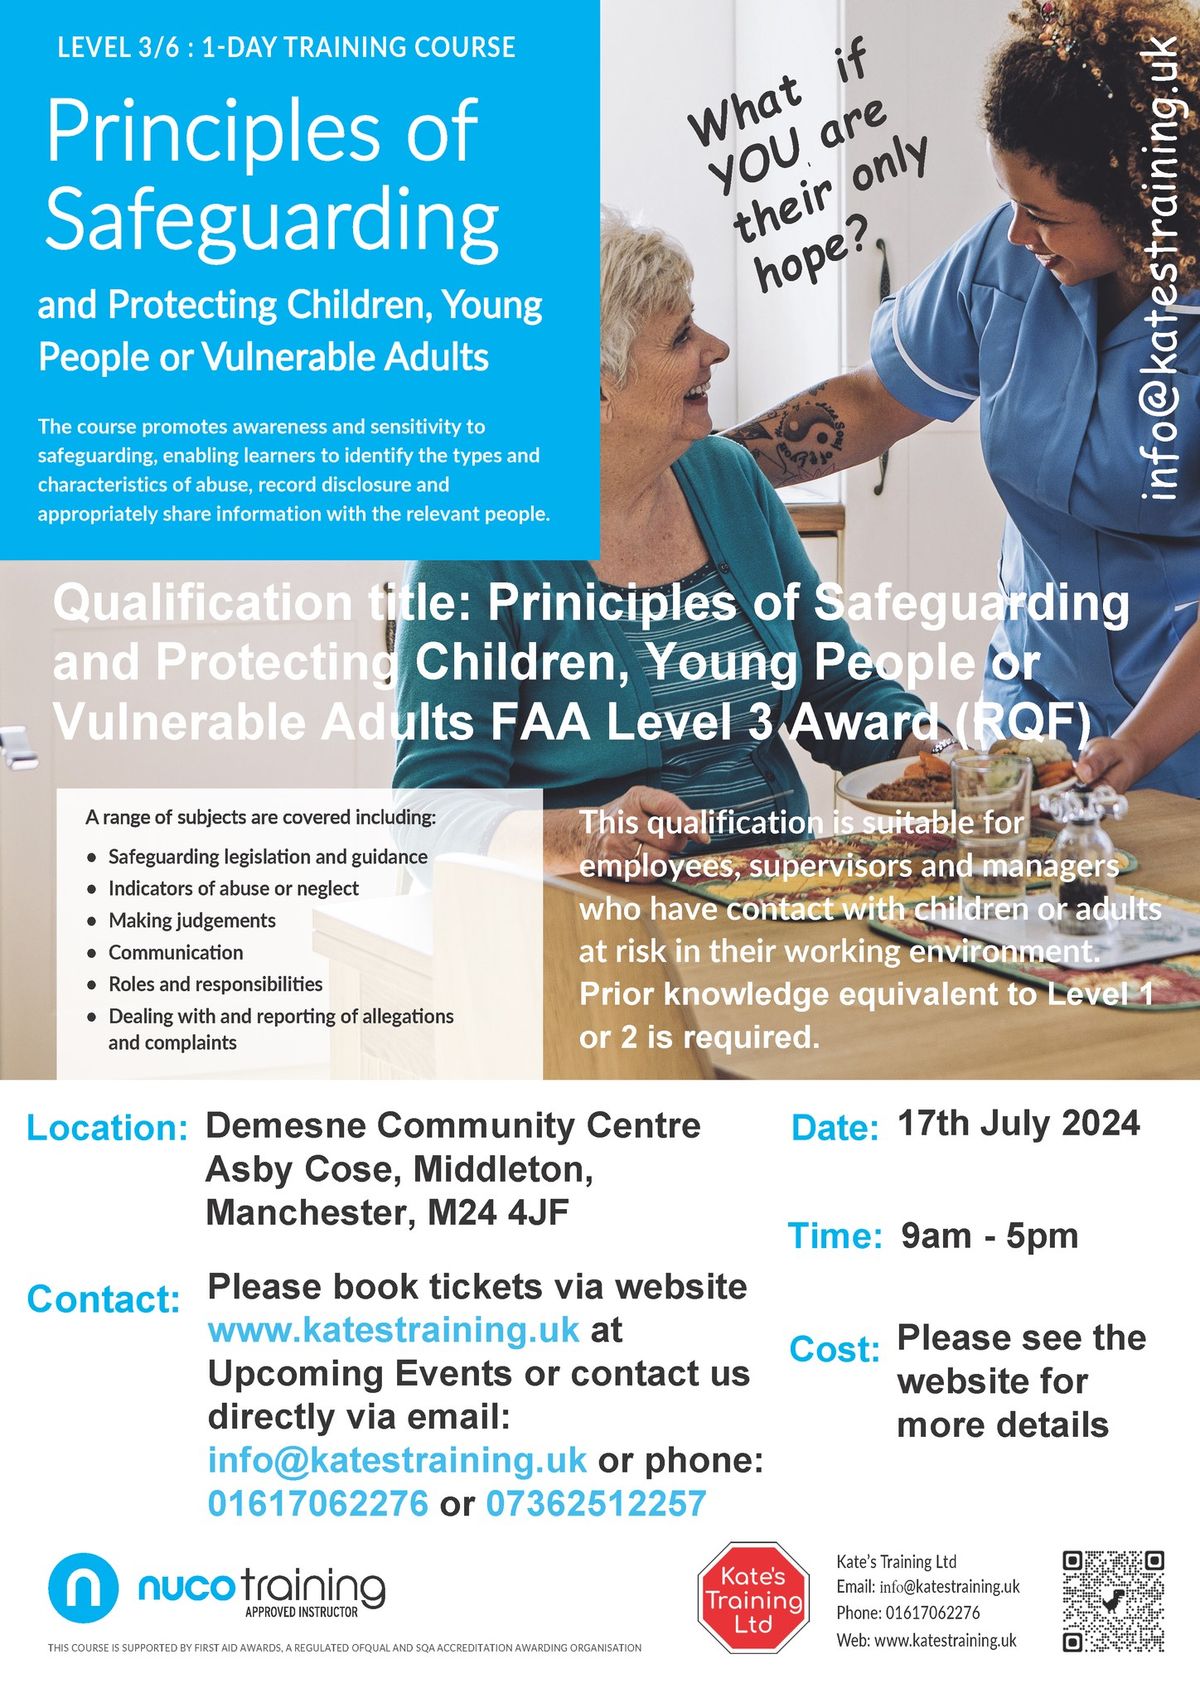 Safeguarding Level 3 (adults and children) - RQF 17th July 2024